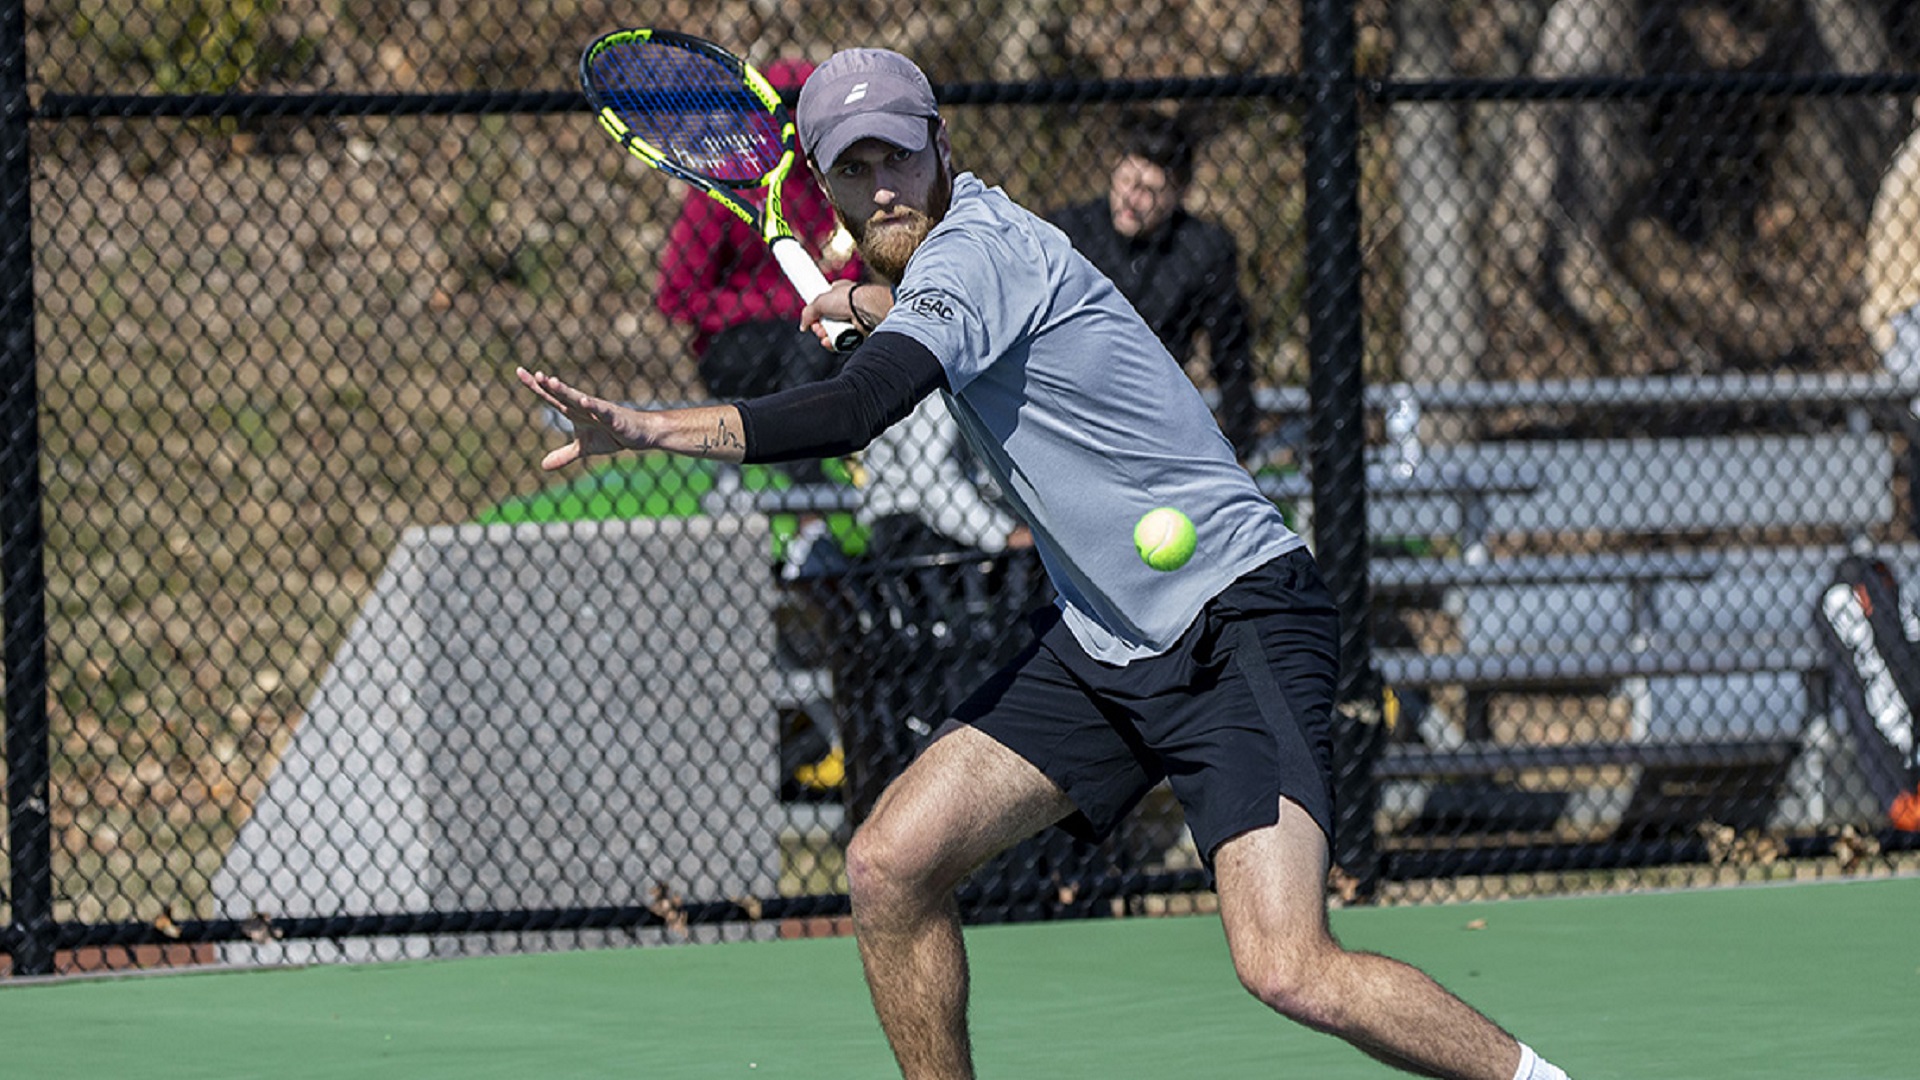 43rd-ranked Pioneers rally for 4-3 win at 48th-ranked Carson-Newman